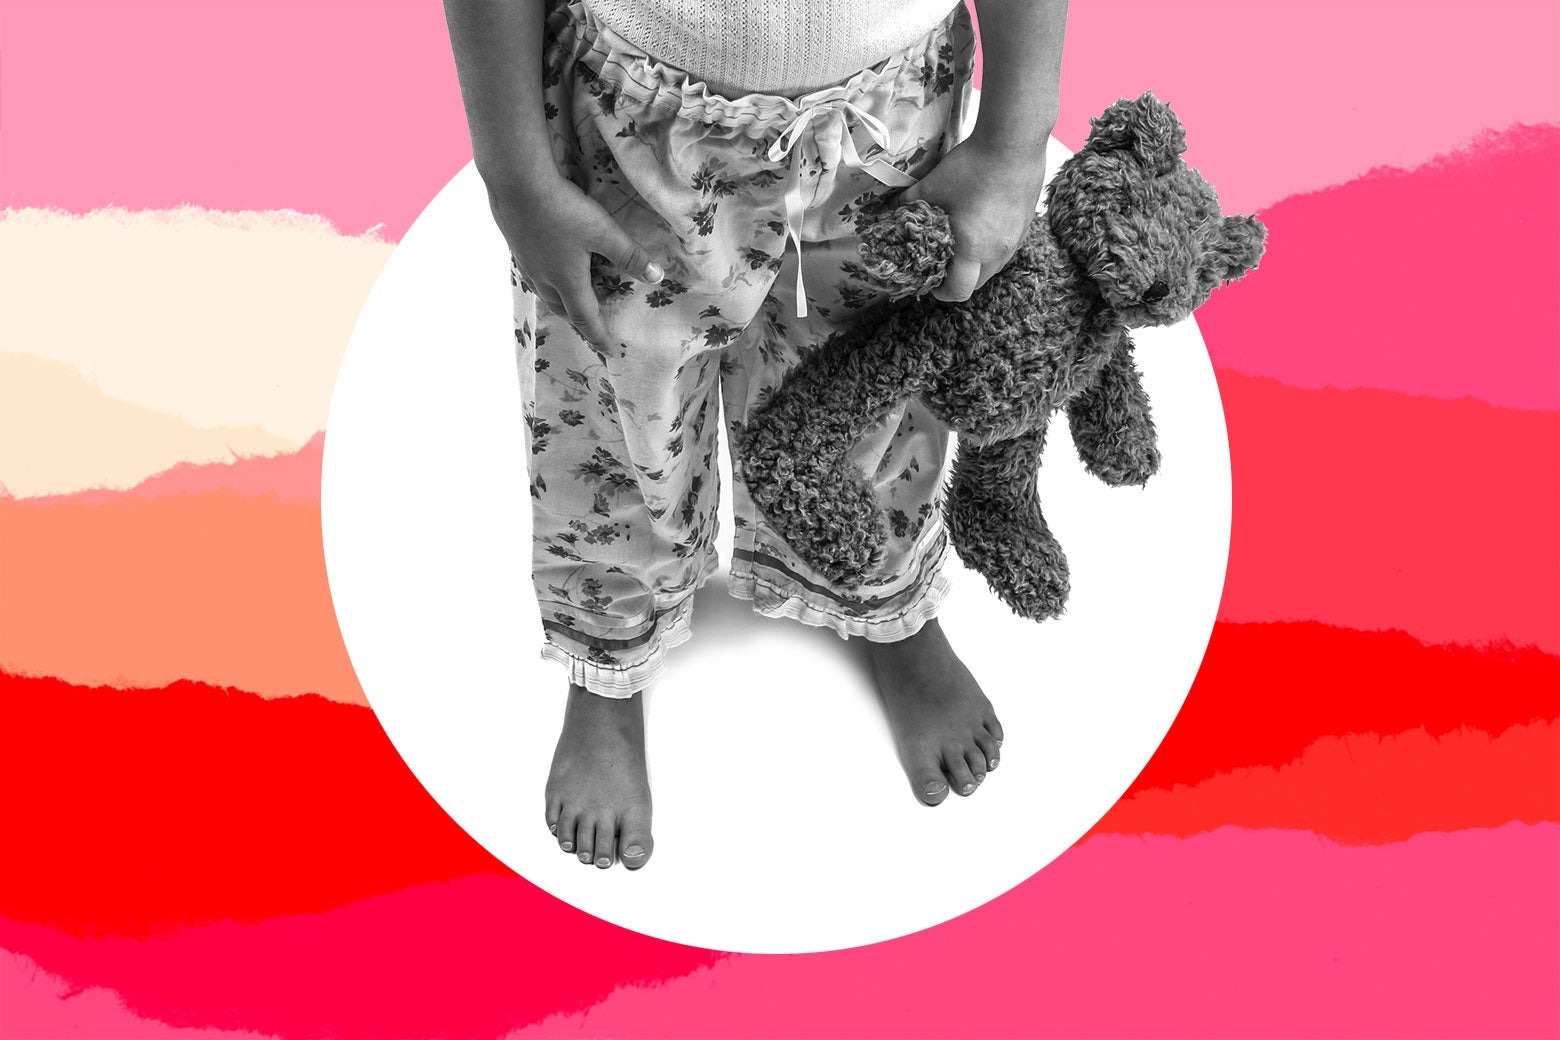 A young girl in her pajamas holding a stuffed animal.